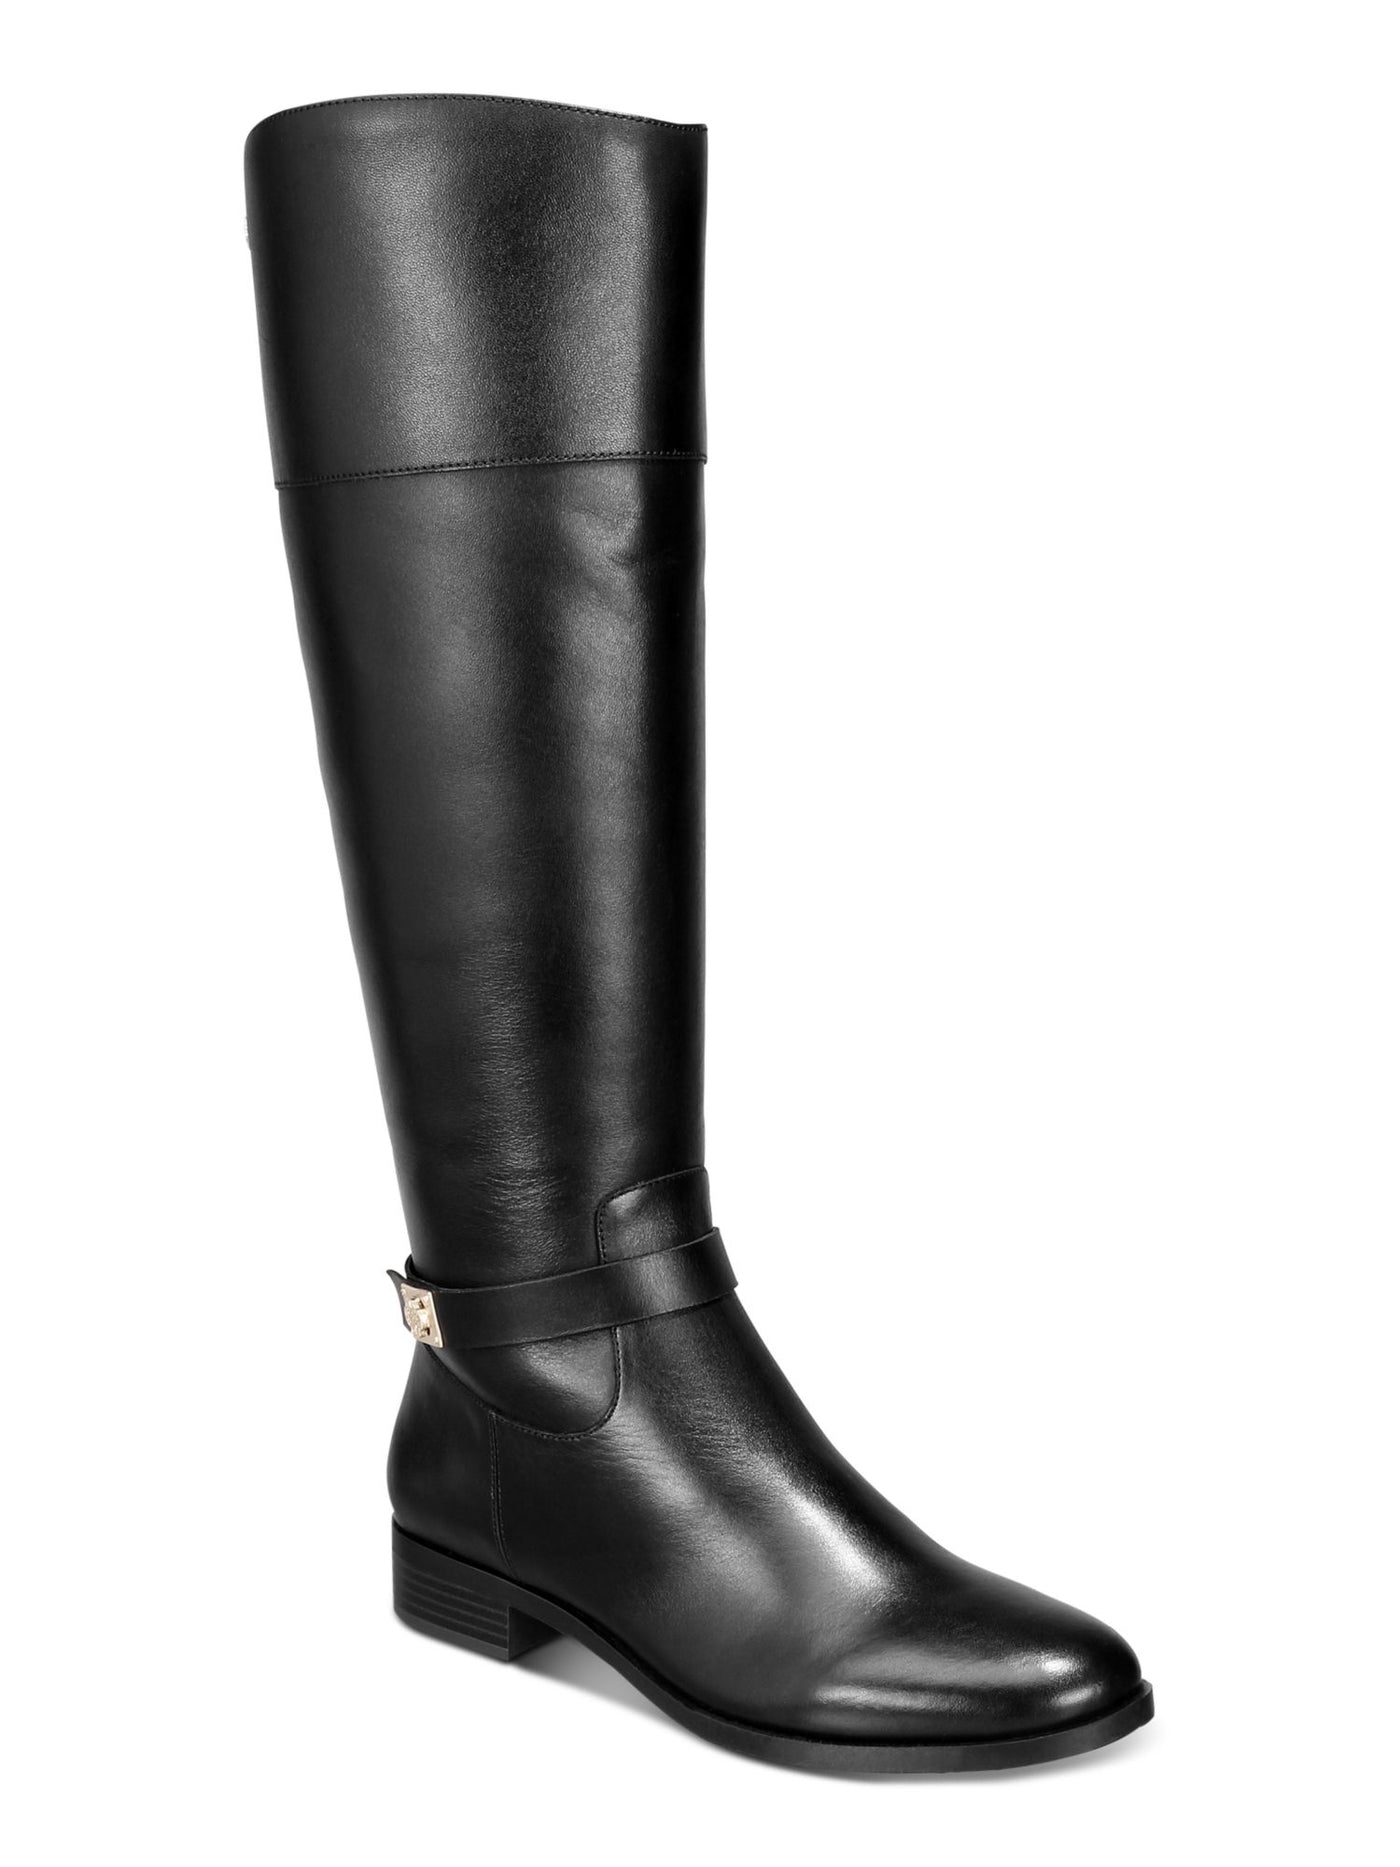 CHARTER CLUB Womens Black Buckle Accent Johannes Round Toe Zip-Up Riding Boot 10 M